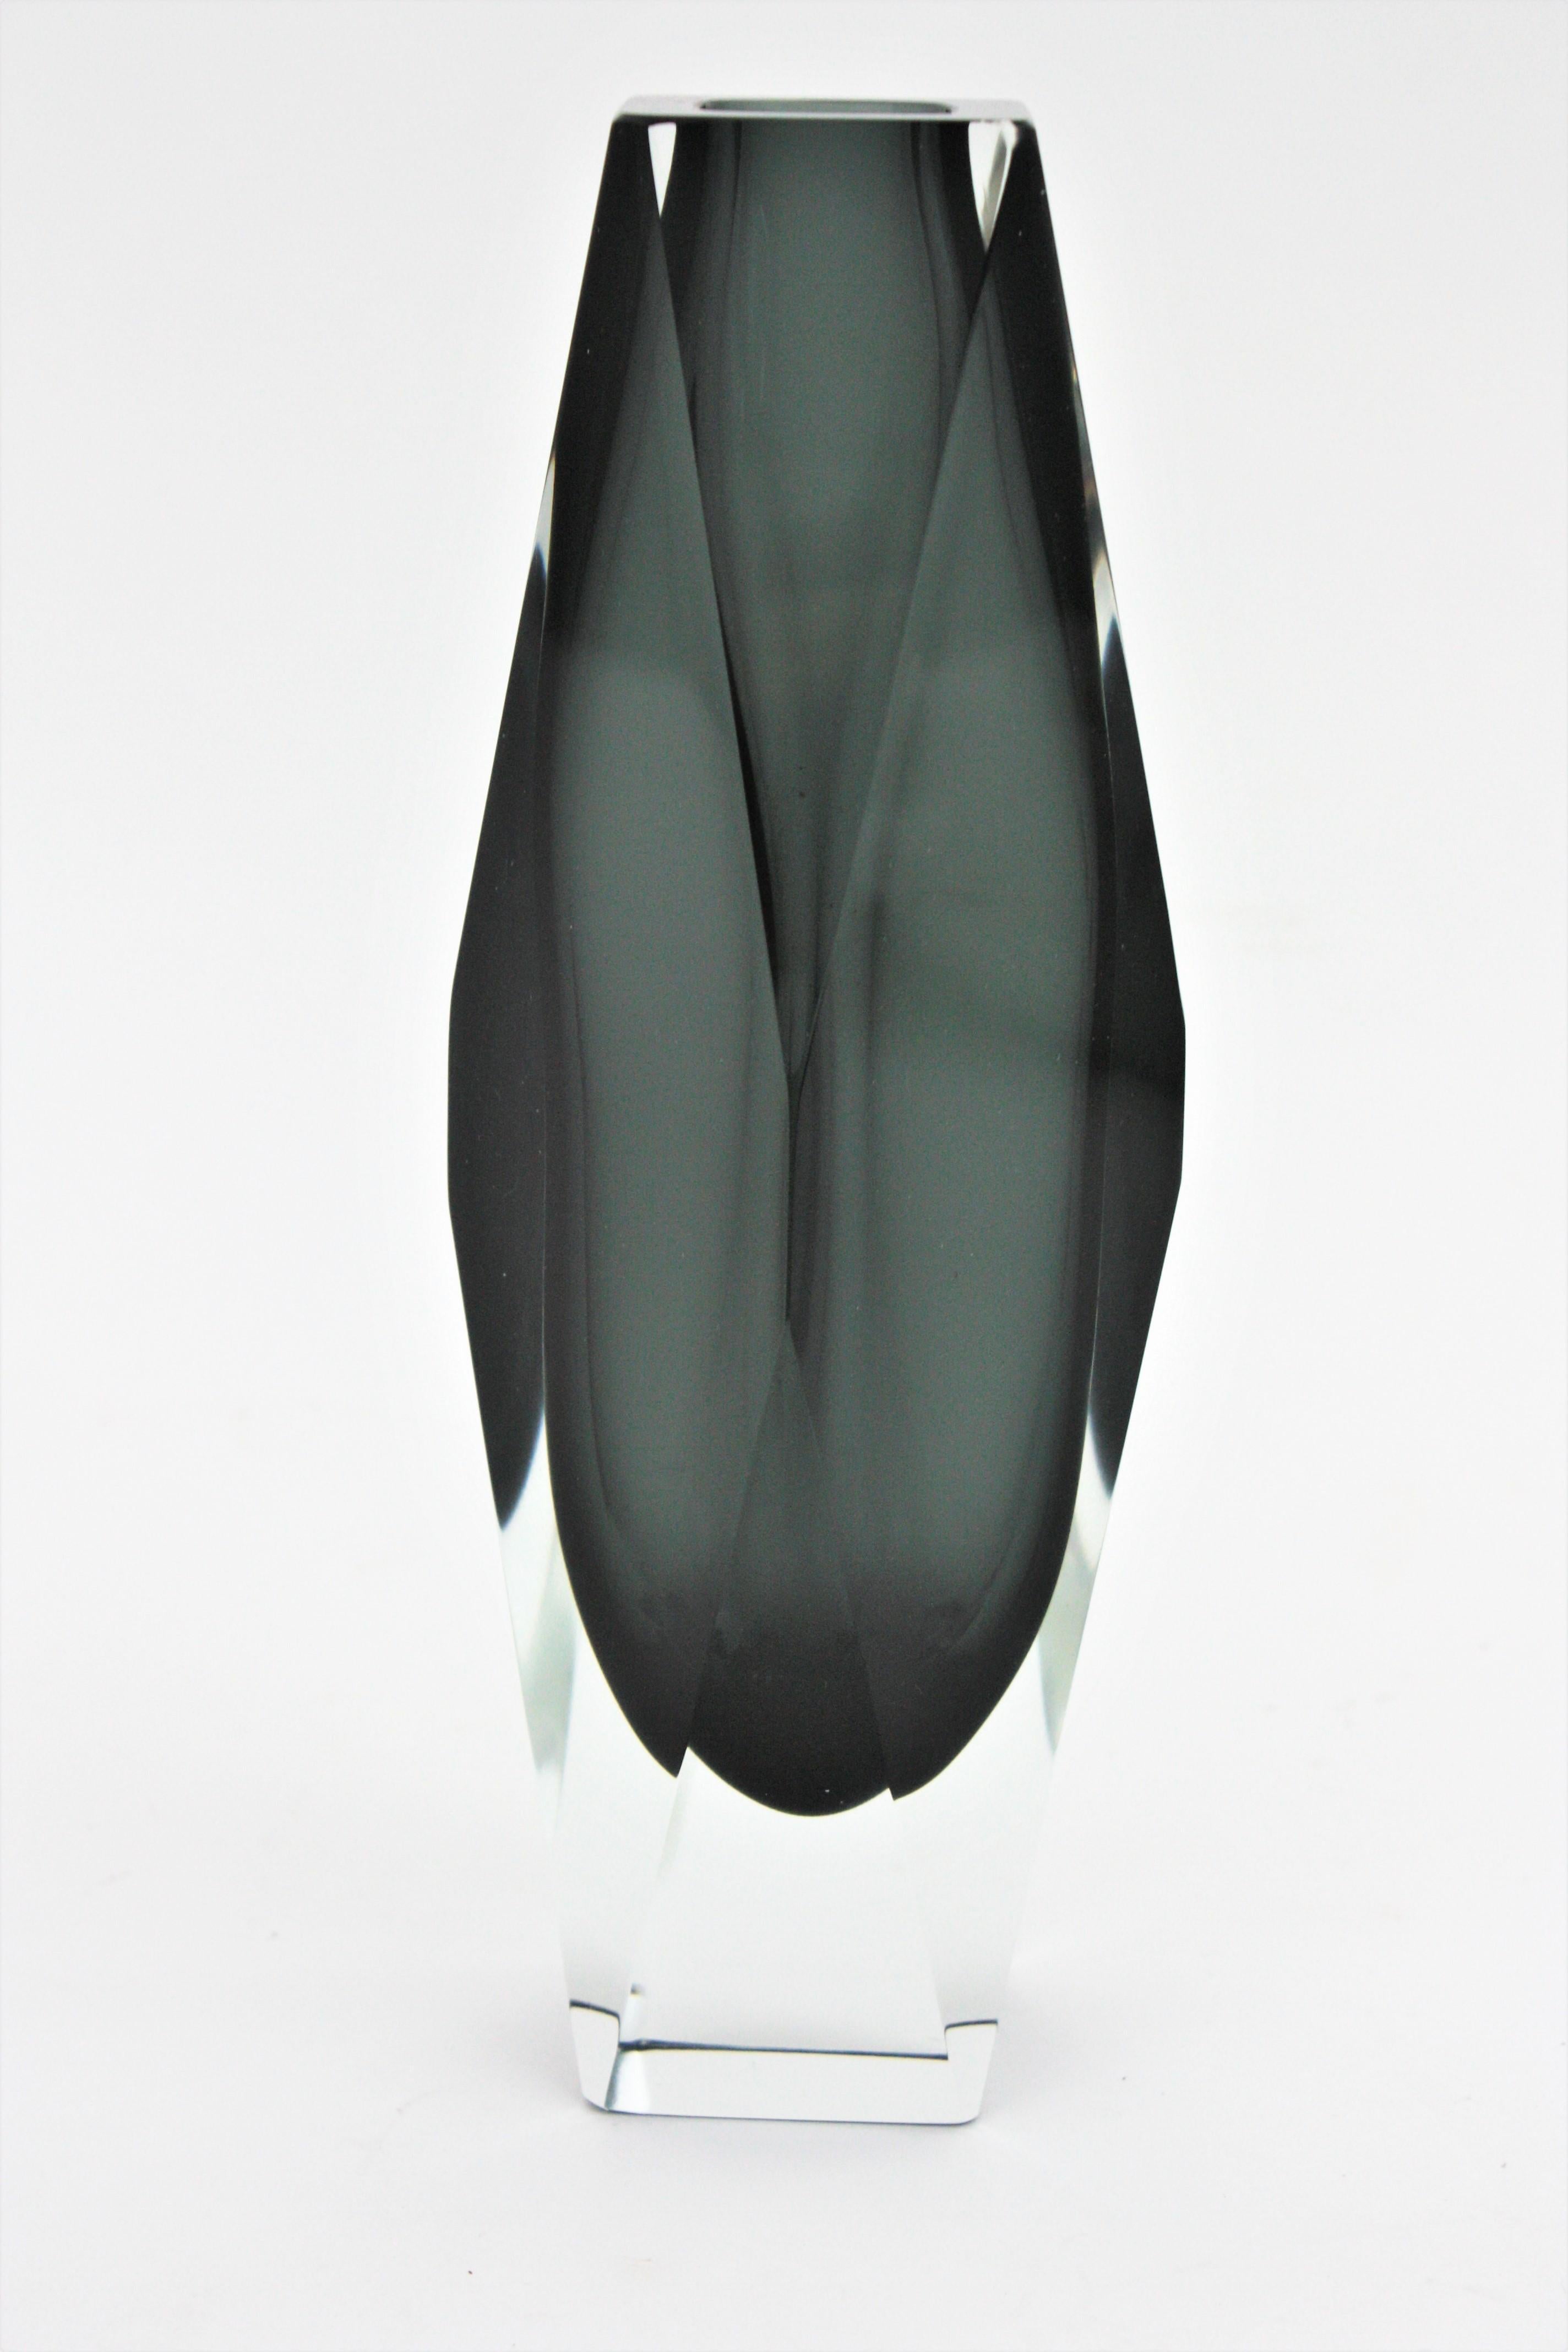 Giant Mandruzzato Murano Sommerso Smoked Grey Clear Faceted Art Glass Vase For Sale 3